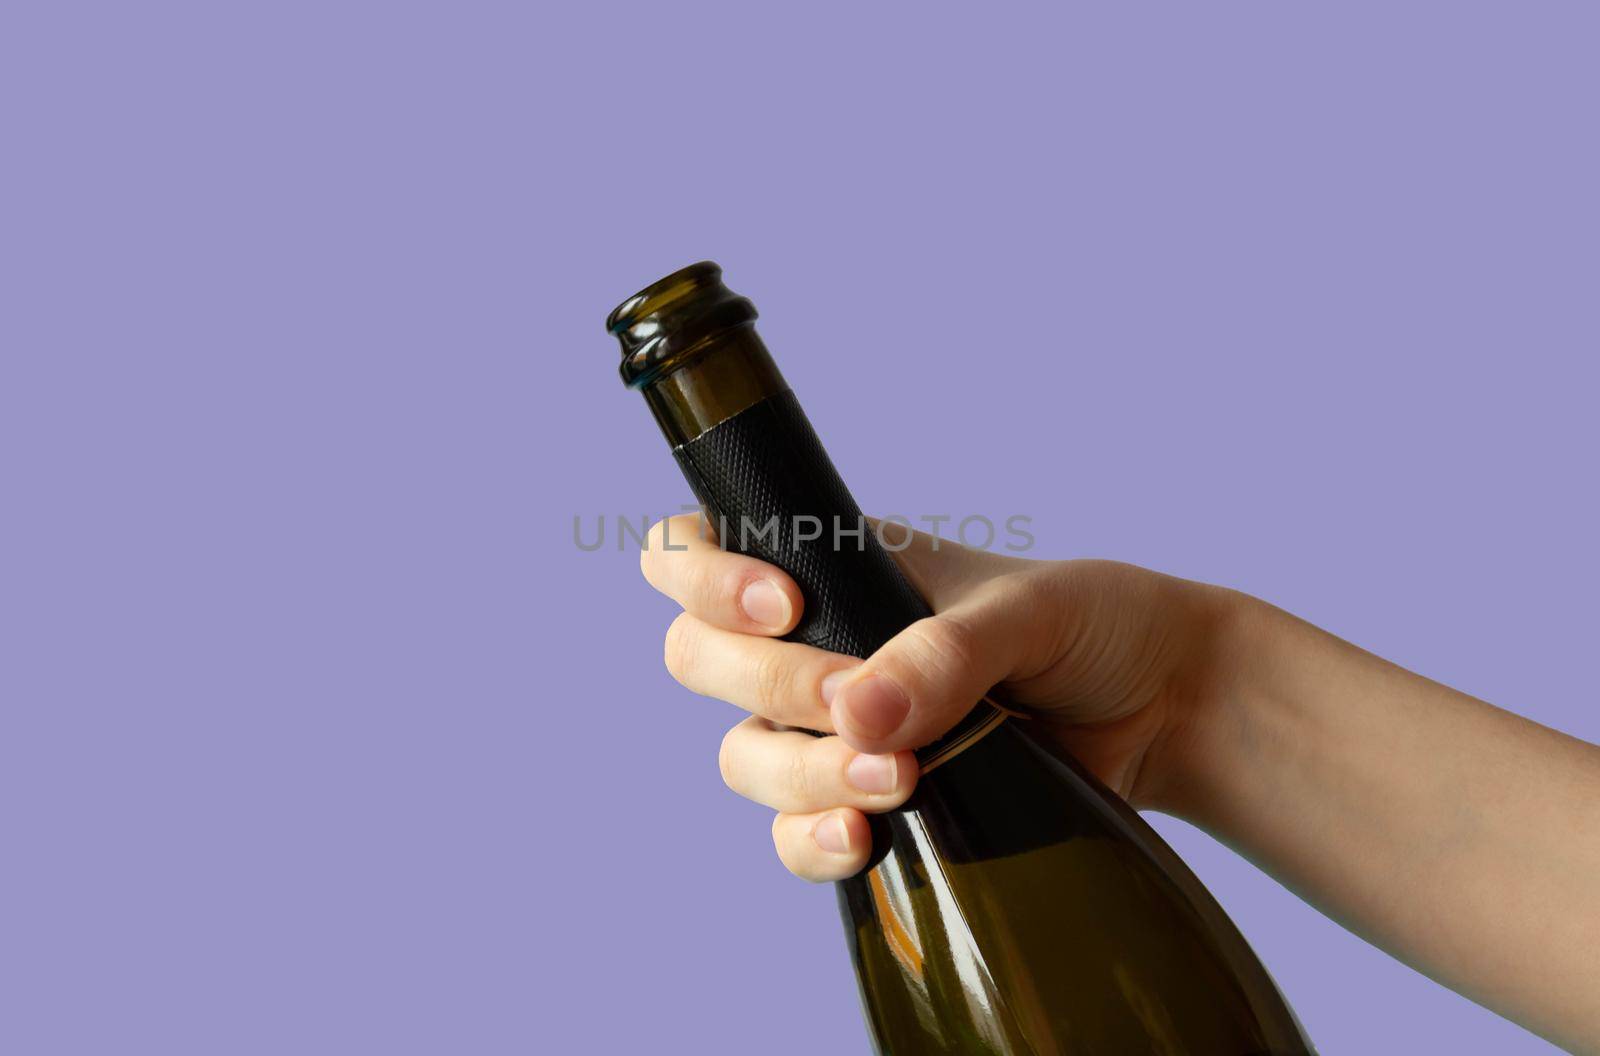 A woman's hand holding an open bottle of champagne on a lilac background.Very peri by lapushka62